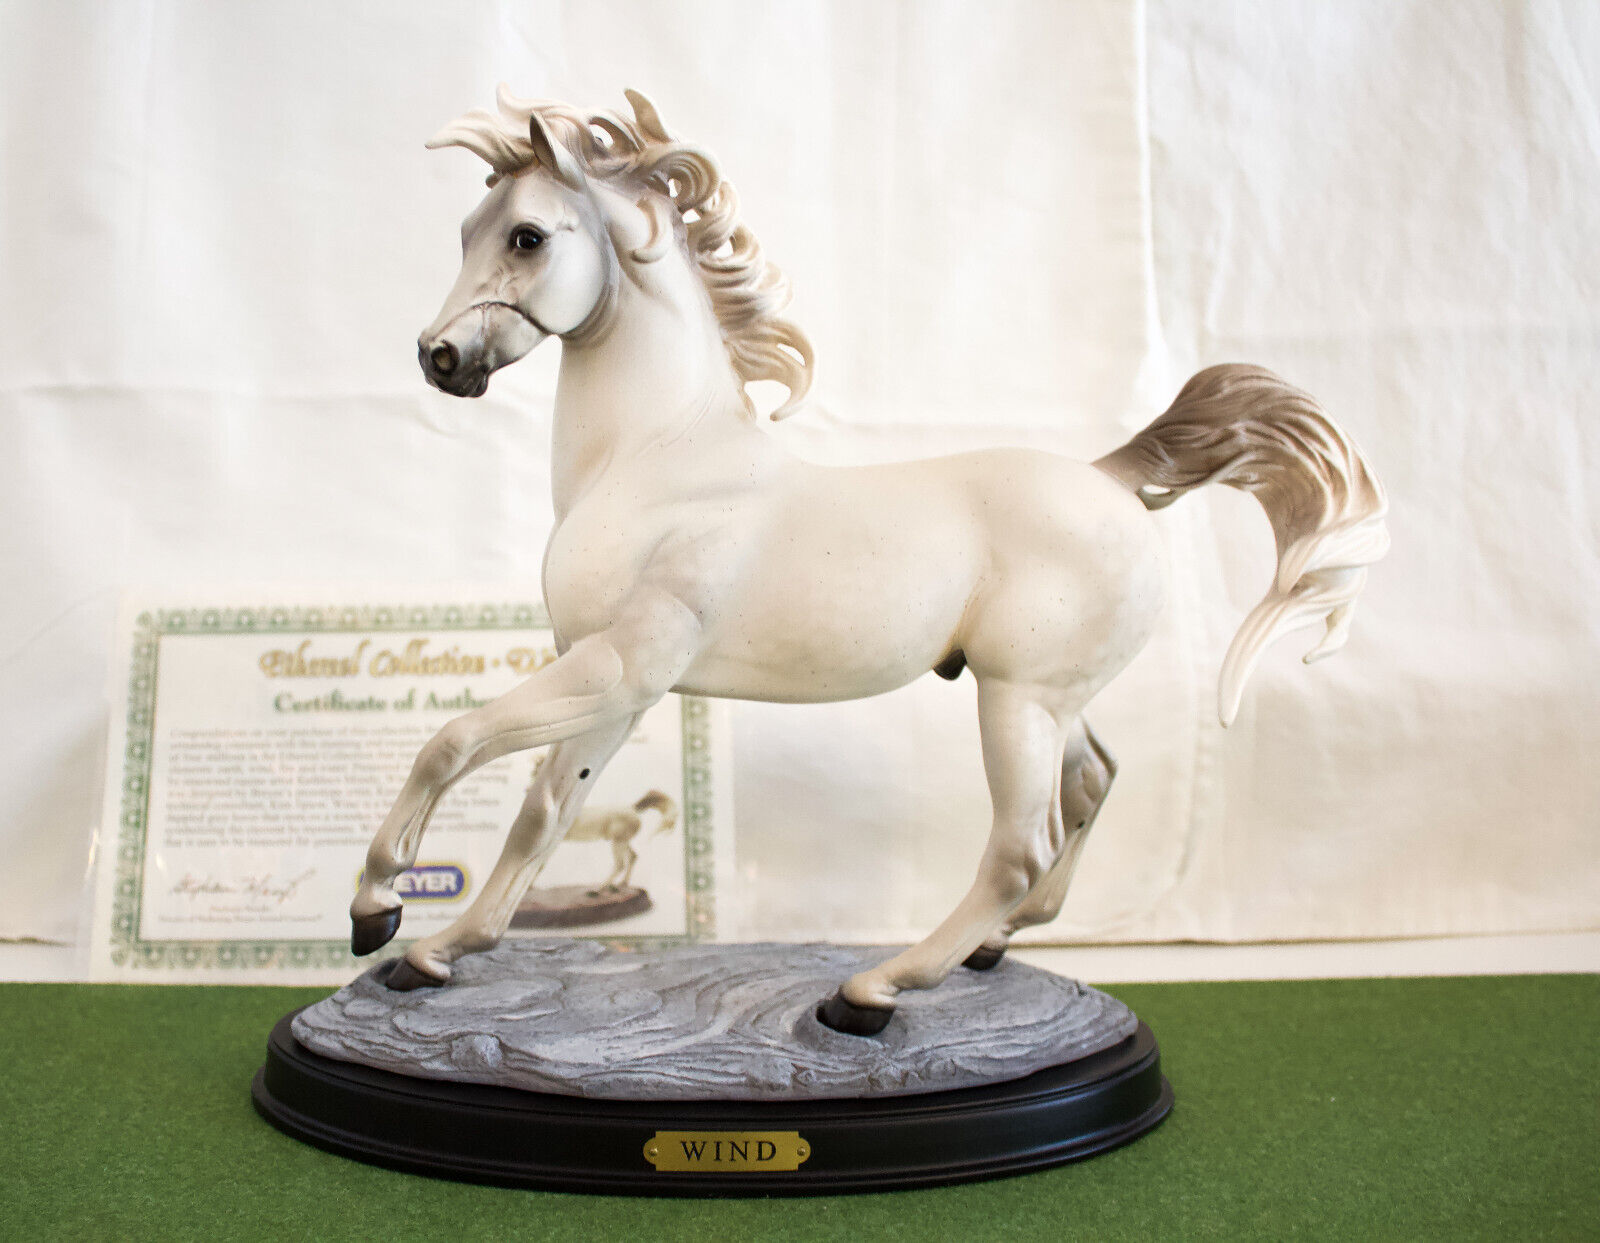 Breyer Ethereal Wind 2008 Grey Horse Limited Edition w/ COA, Stand/Base